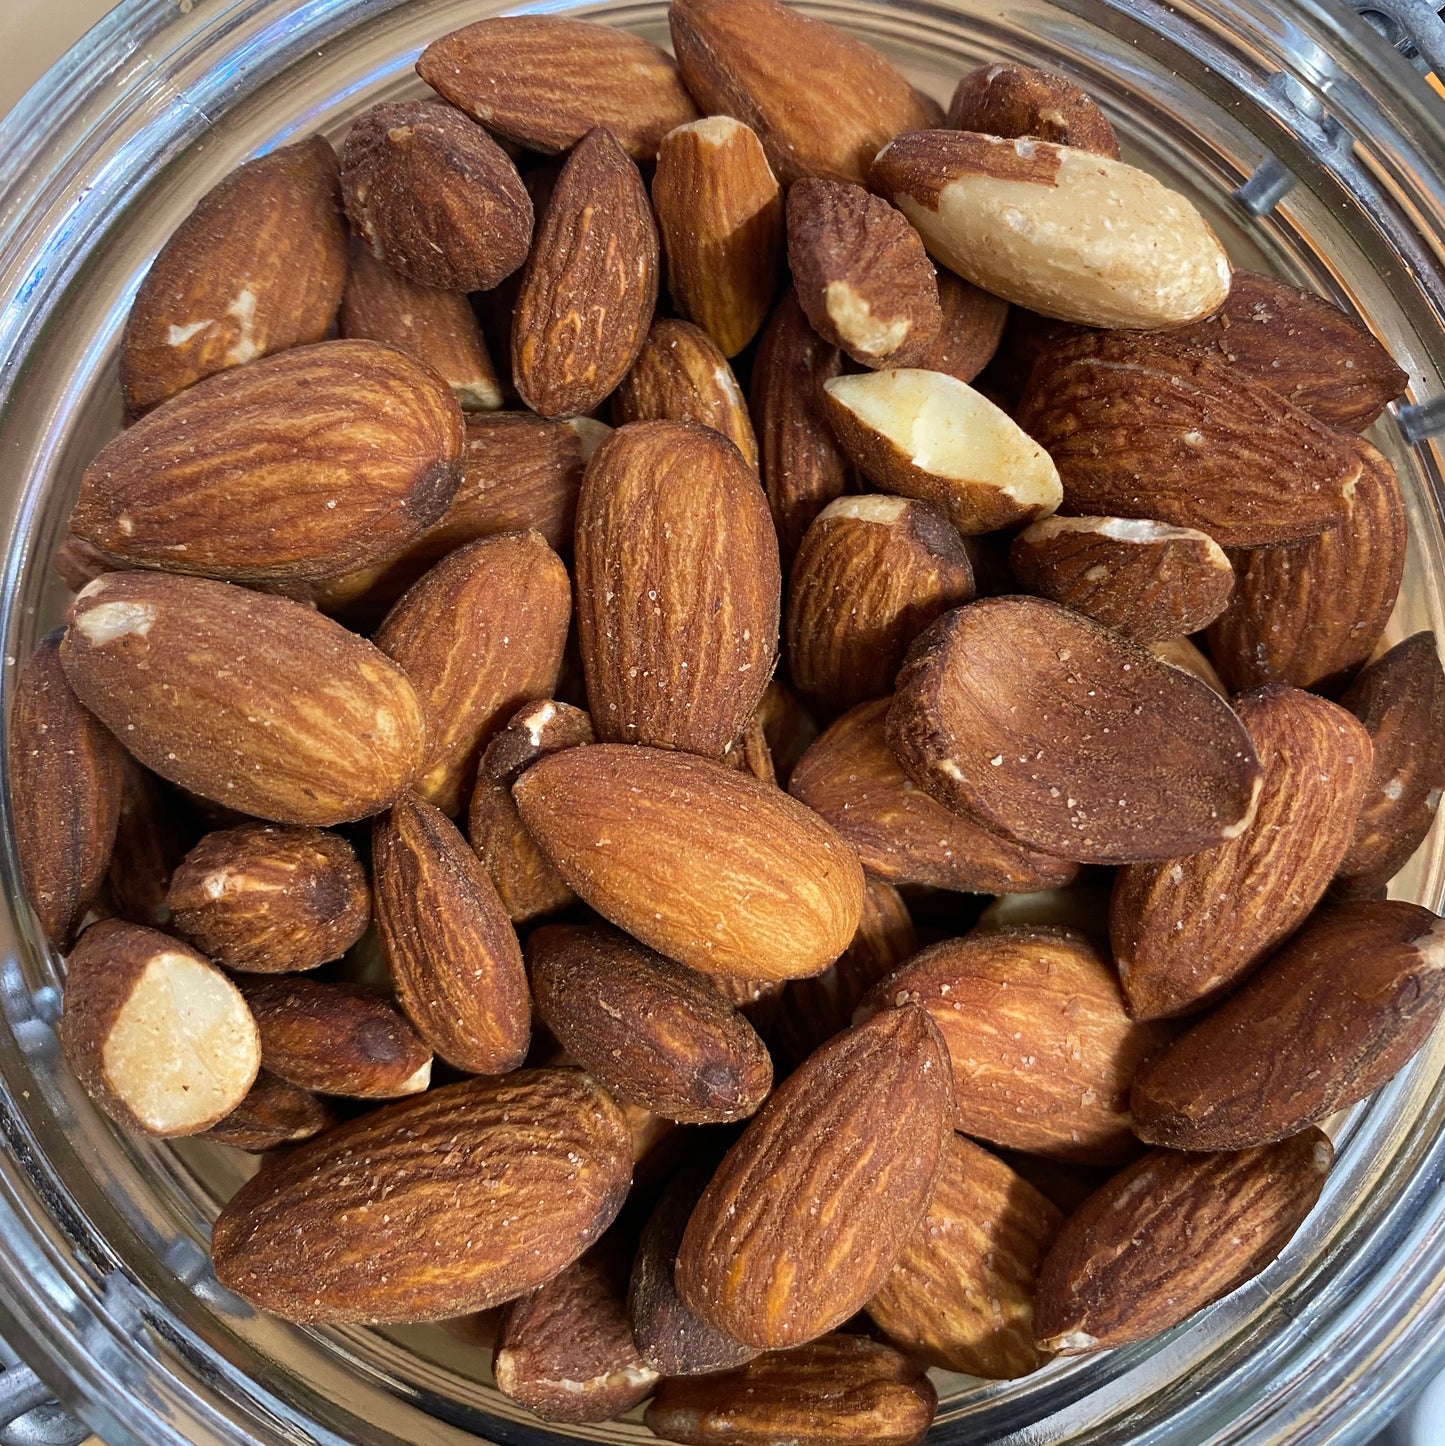 Nuts: Almonds - Roasted & Salted